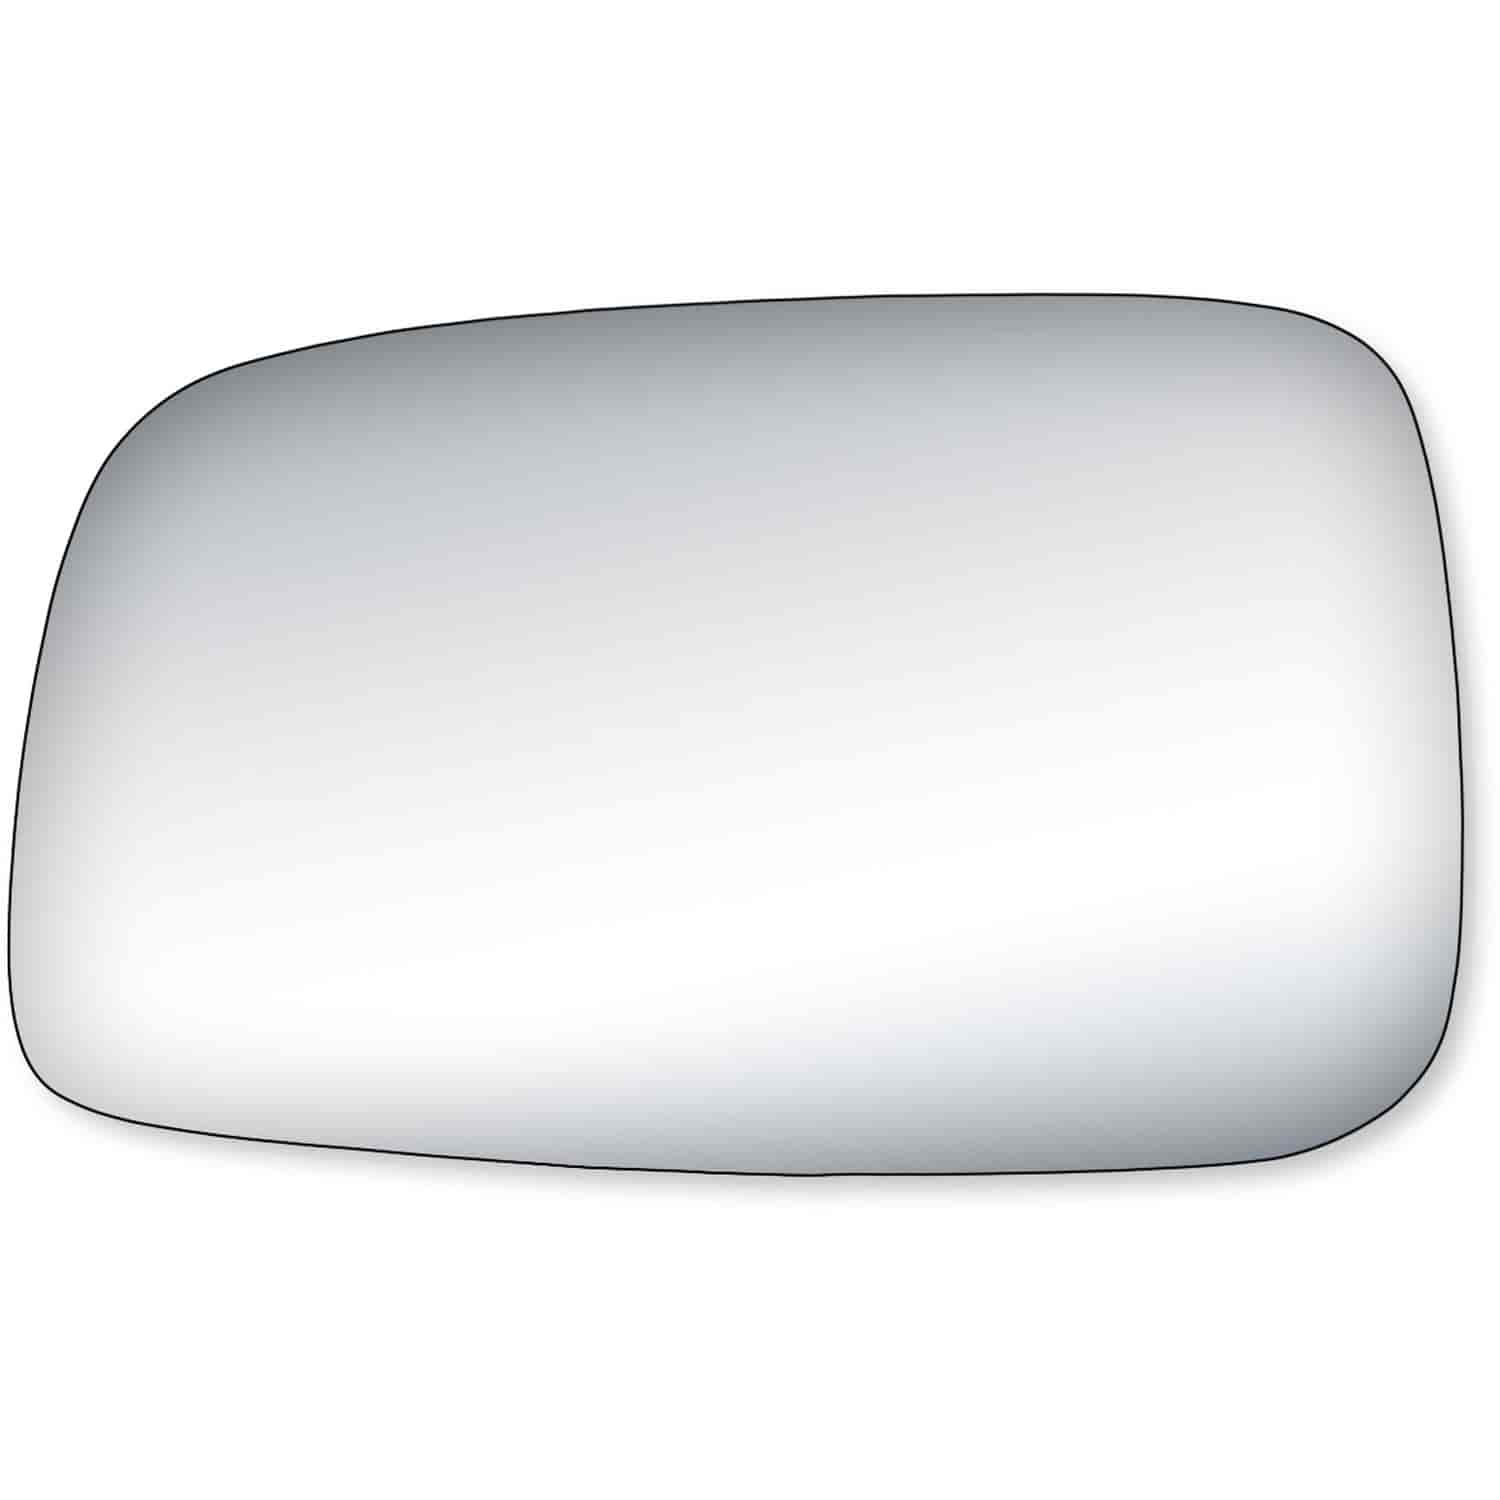 Replacement Glass for 04-06 Scion xB; 05-10 Scion tC the glass measures 4 1/16 tall by 6 3/4 wide an